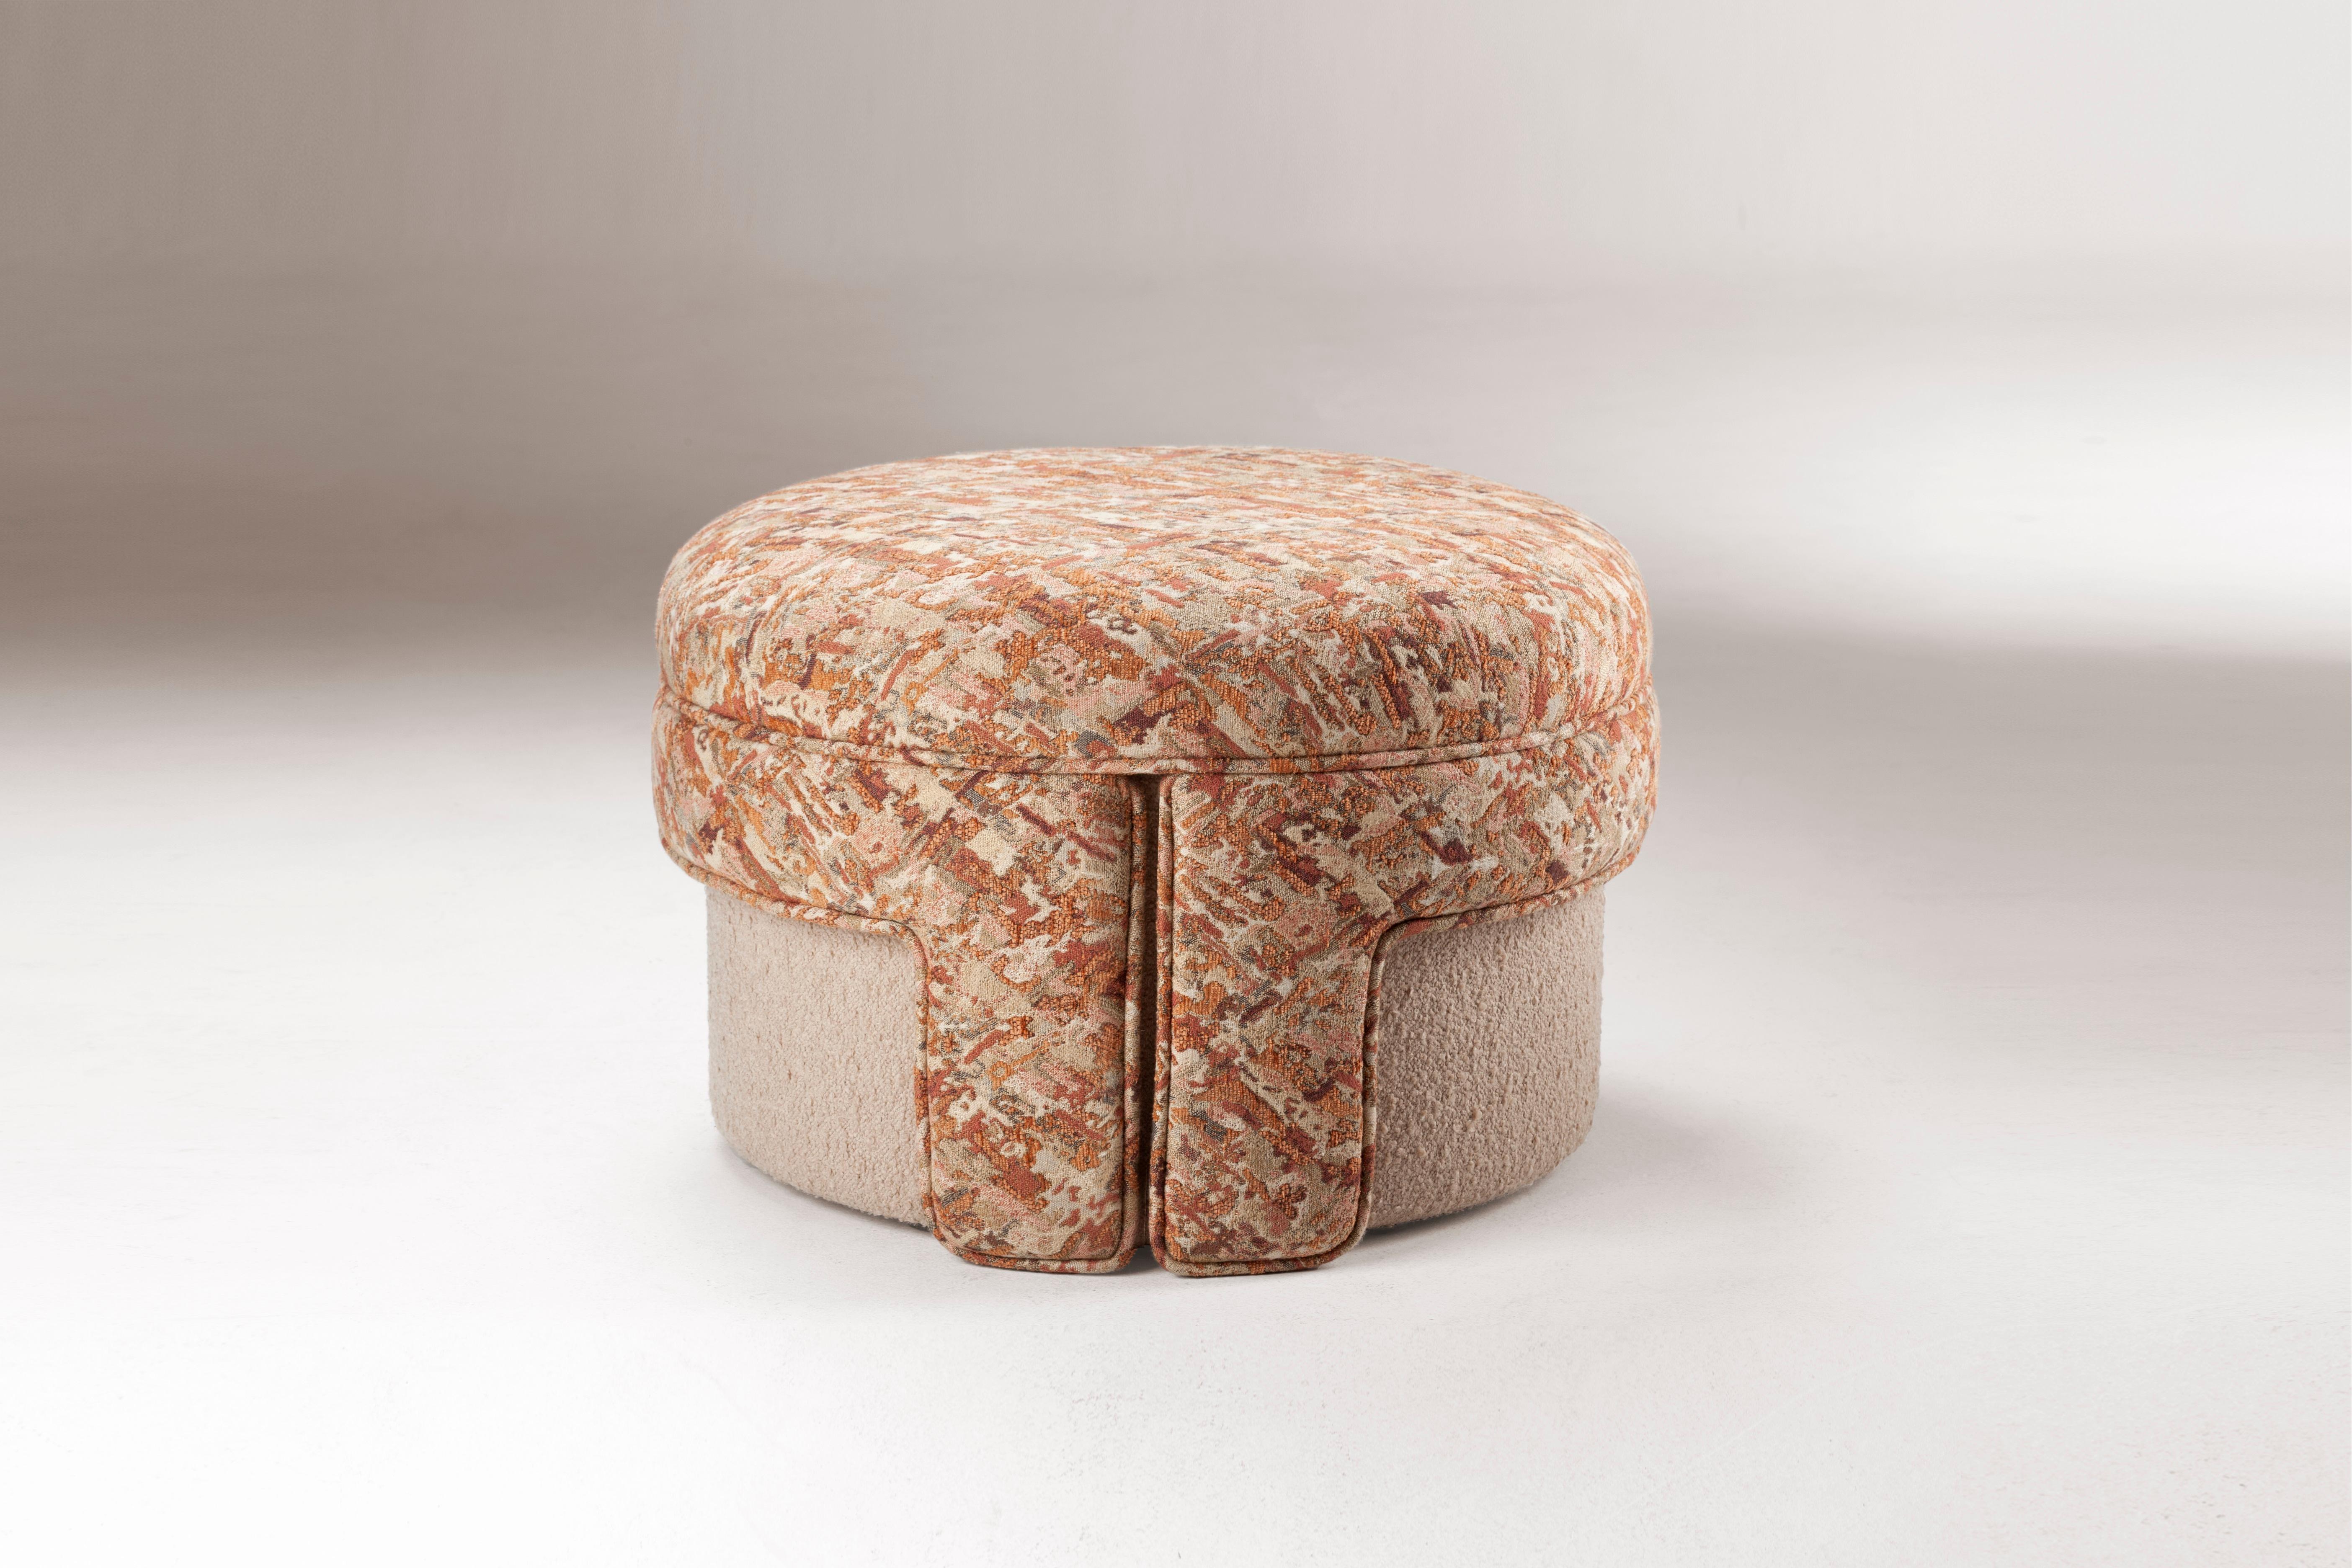 L’Unité pouf is proportional and sculptural, perfectly made to the human scale. It gathers strong upholstered shapes lightly supported on elegant stands. A piece that excites the eye and imagination, inspired by modernist architecture’s style and